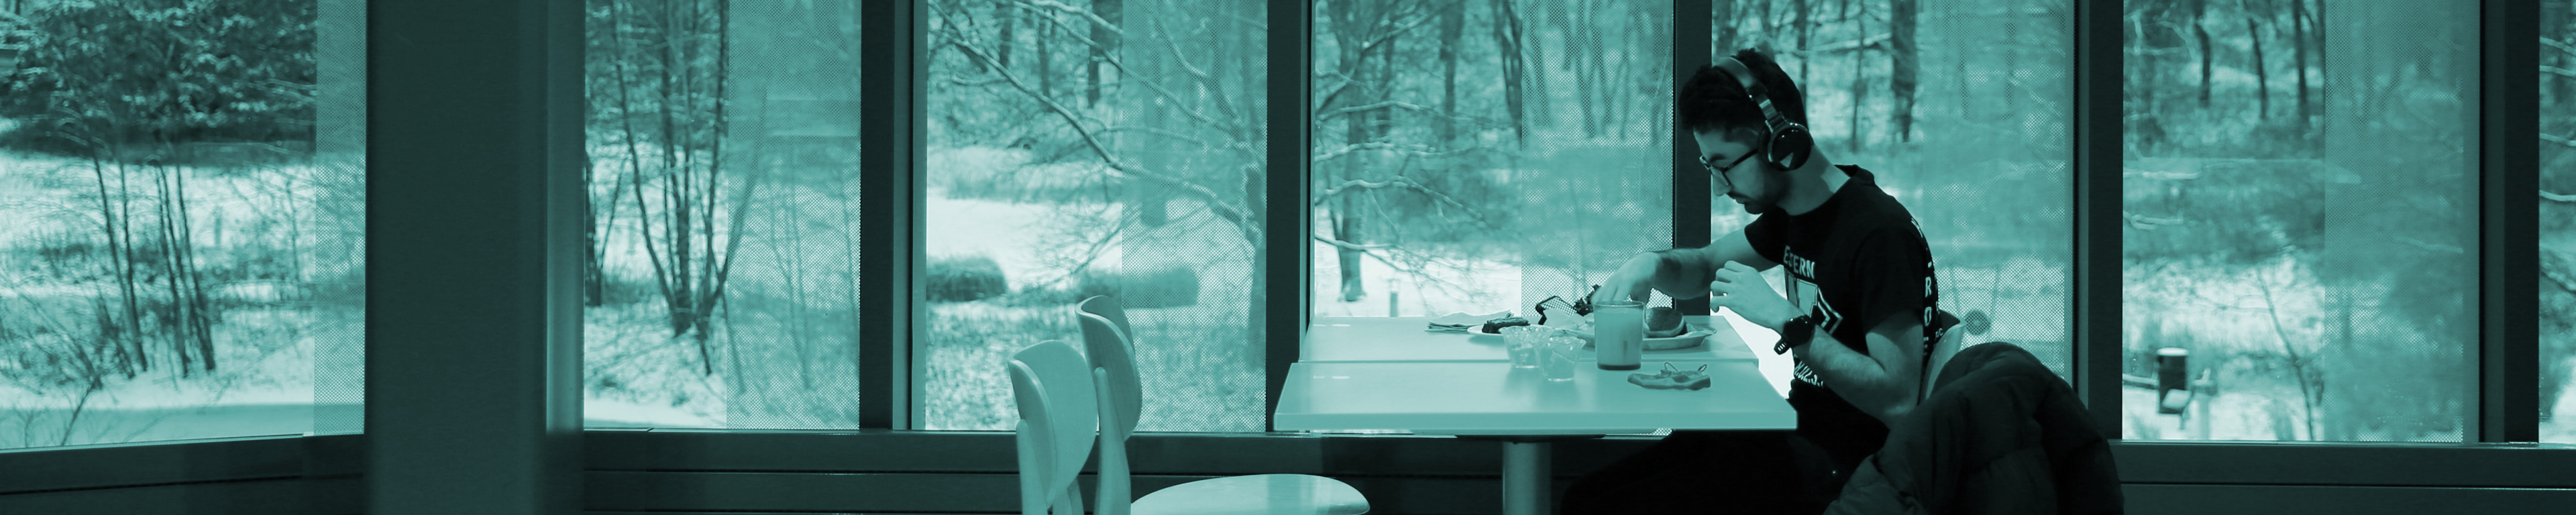 Student sitting by window in Valley Dining Center, snowy background